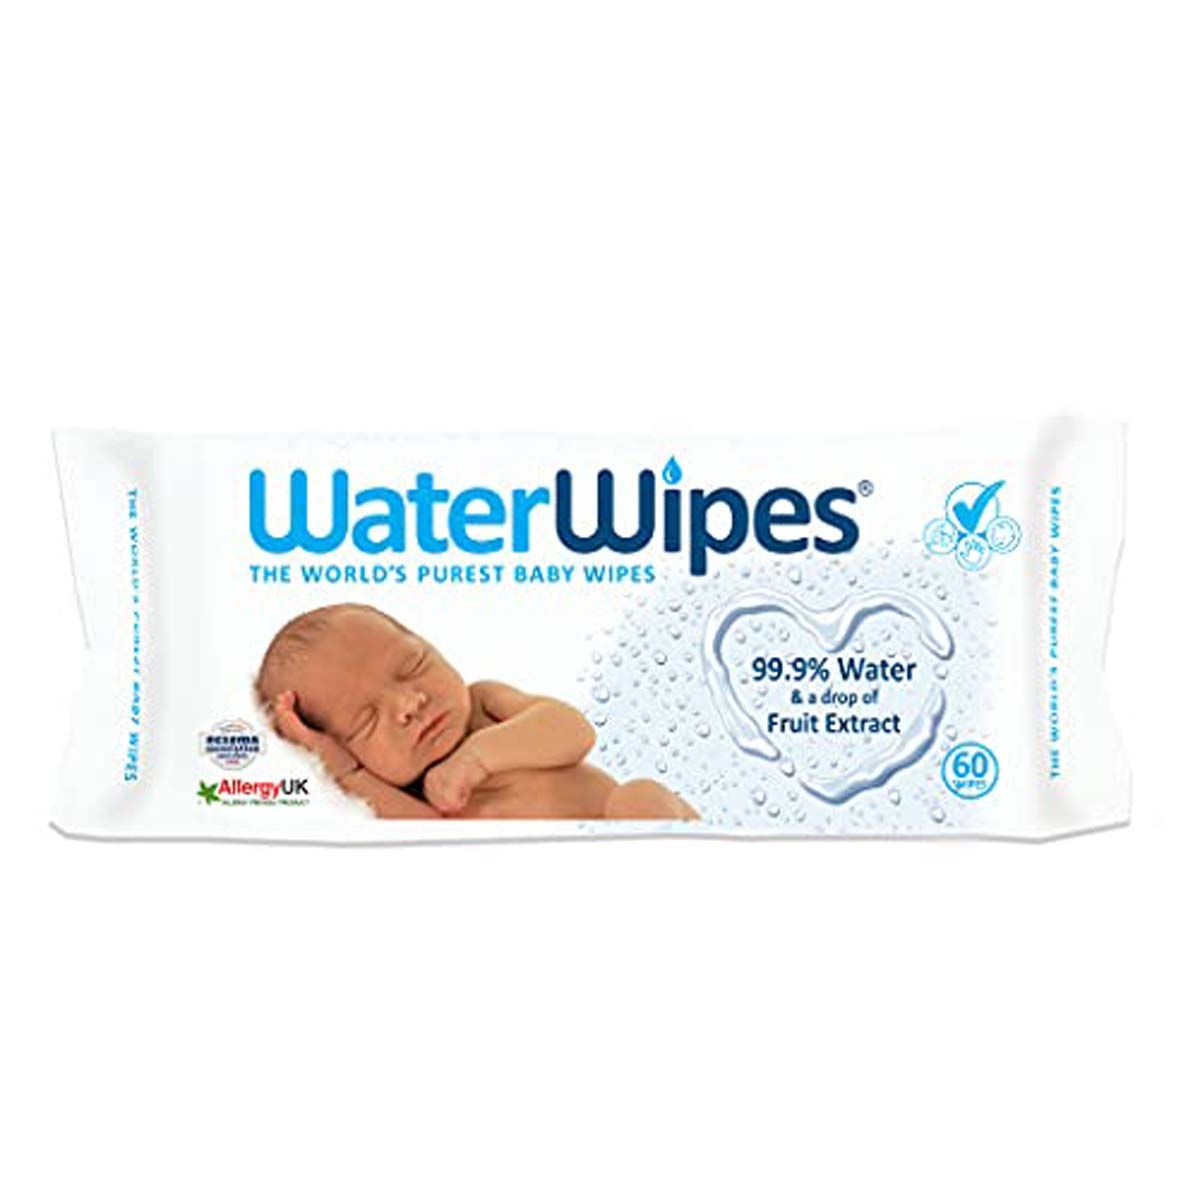 Buy WaterWipes Fruit Extract Baby Wipes, 60 Count Online